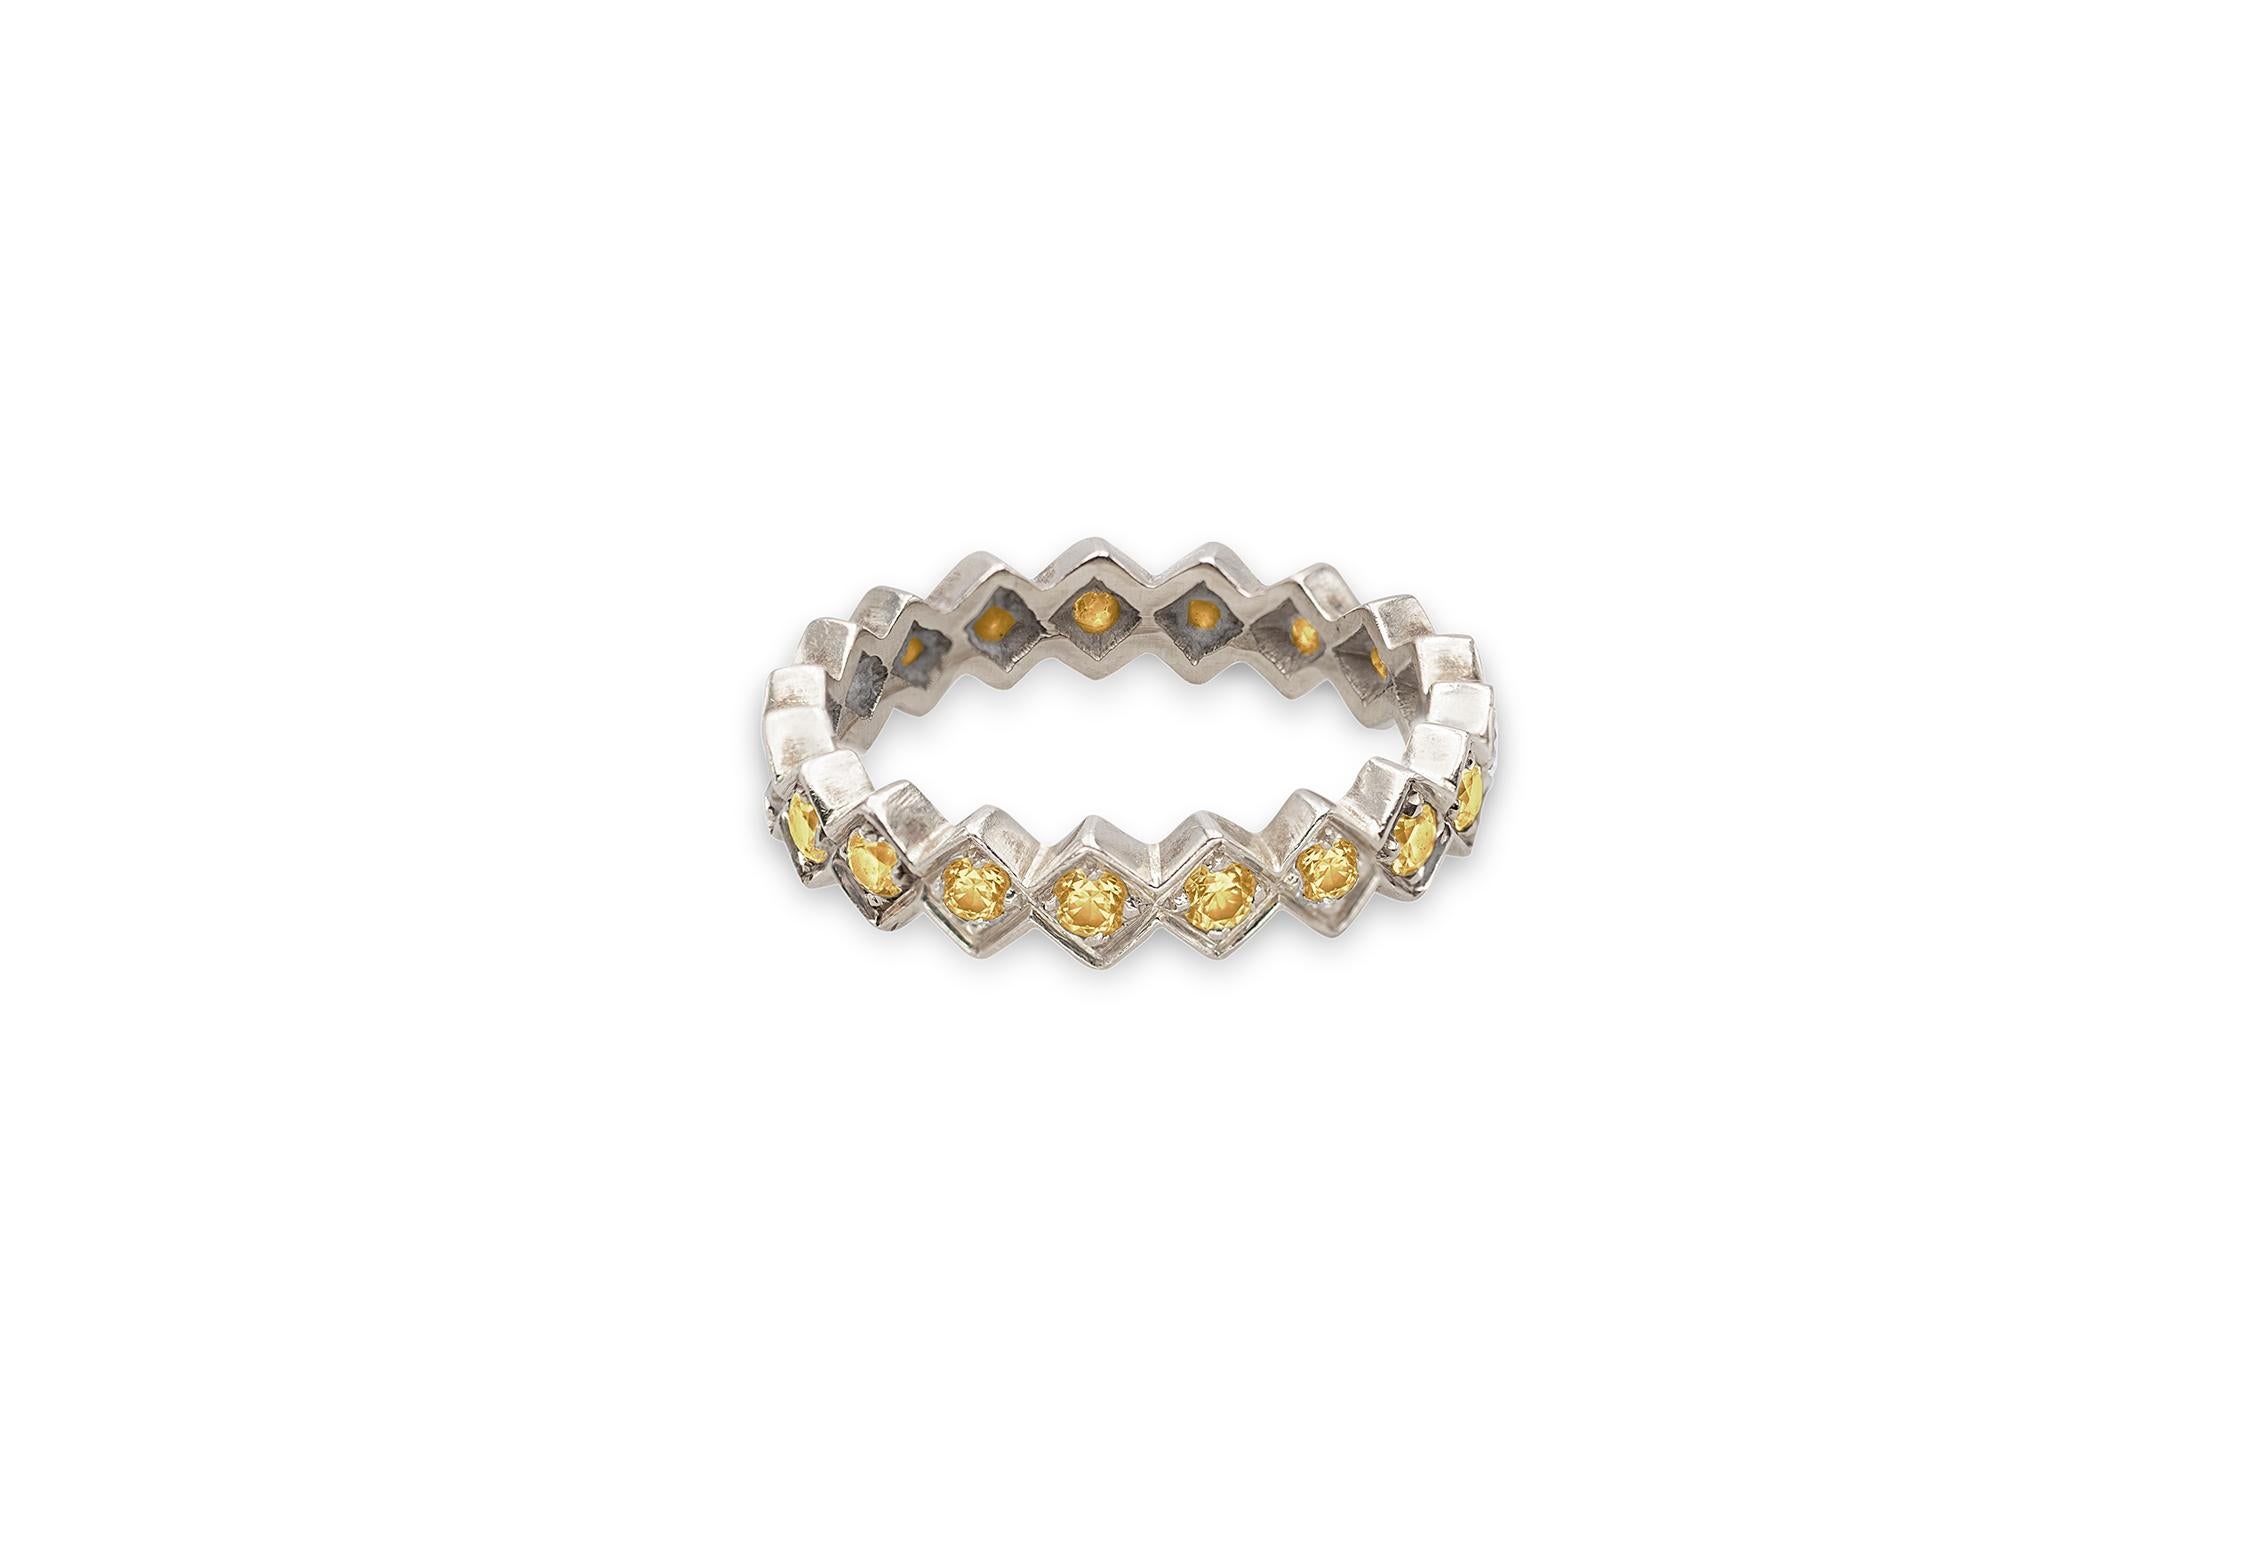 Rossella Ugolini Design Collection Contemporary 18 Karats White Gold Yellow Diamonds Design Ring
An amazing design ring handcrafted in 18 karats white gold and adorned with Canary Yellow Diamonds
Due to its semplicity it fits every outfit and gives